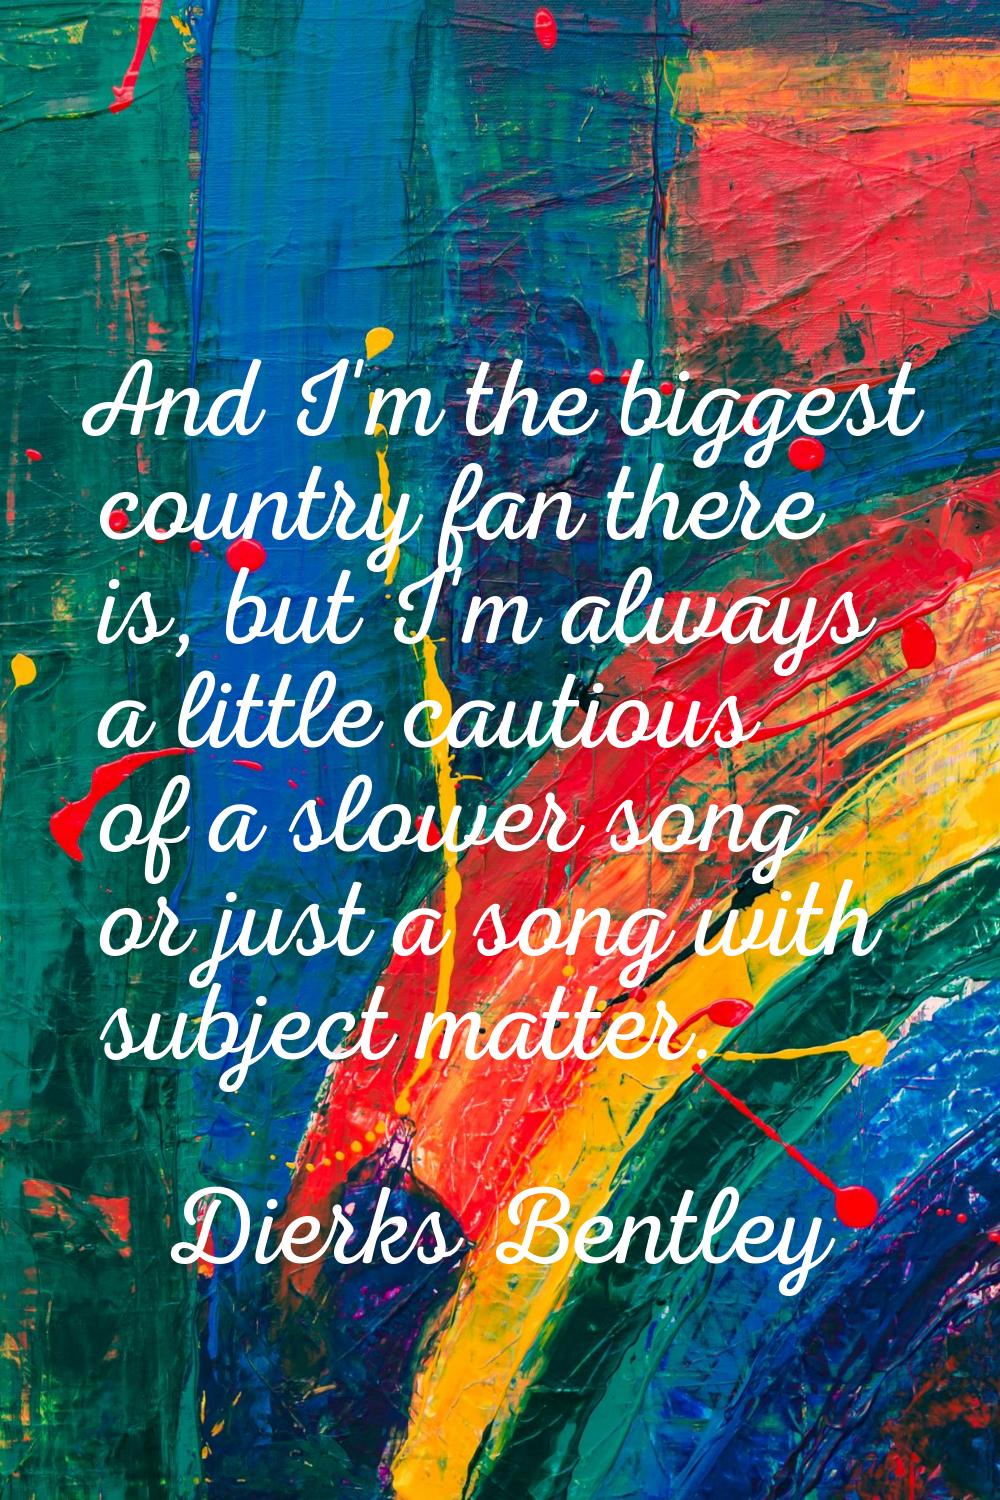 And I'm the biggest country fan there is, but I'm always a little cautious of a slower song or just